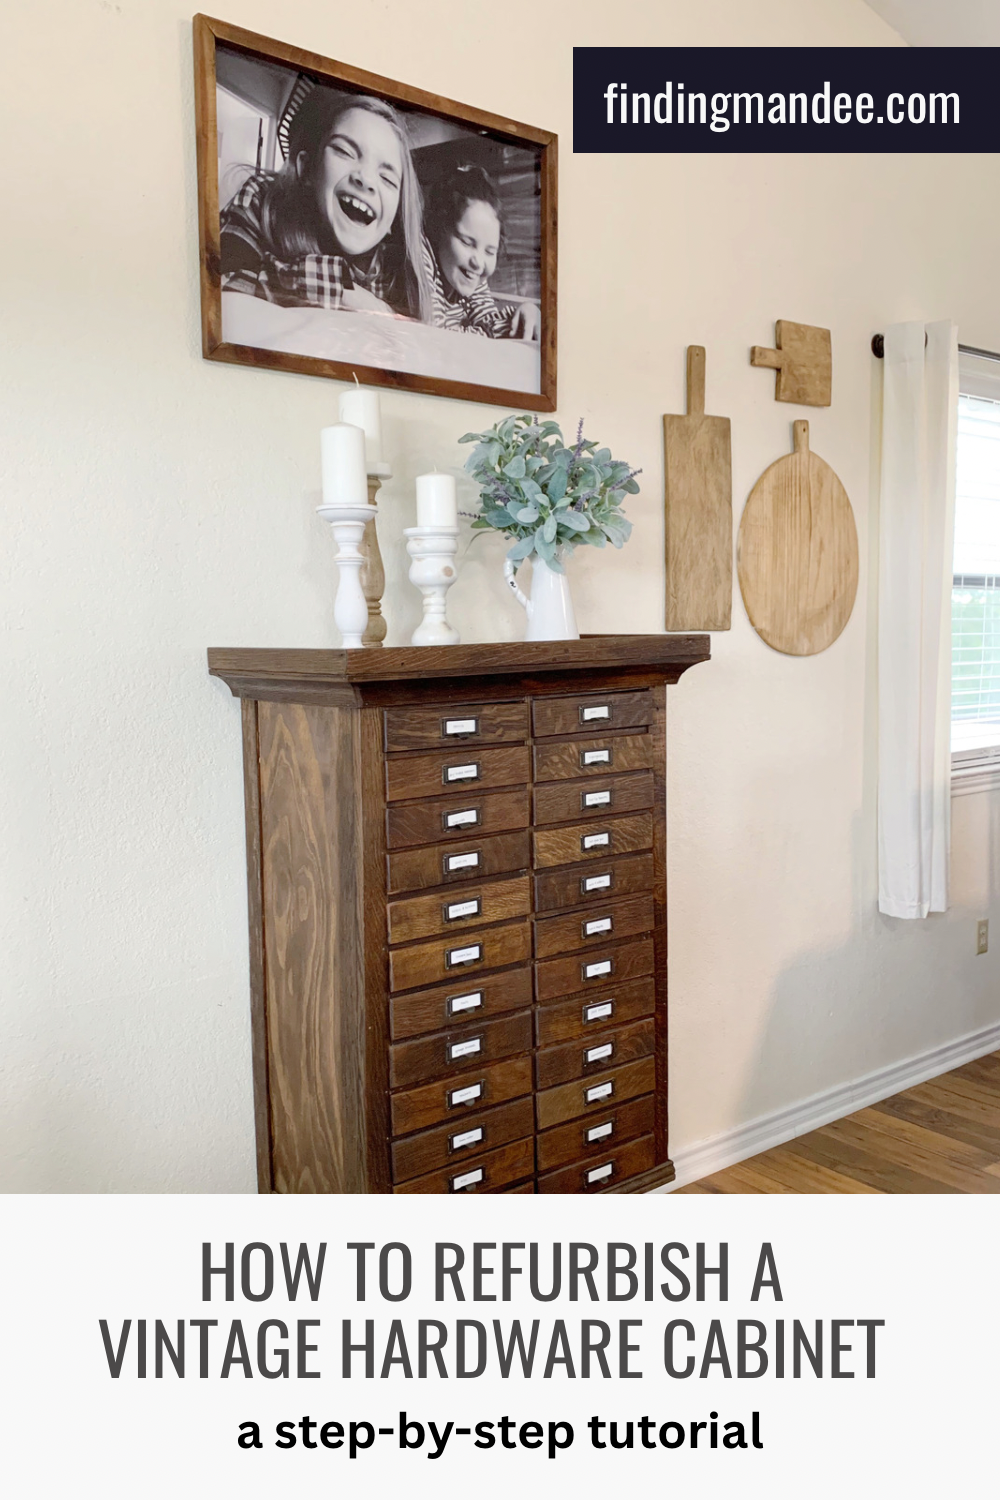 How to Refurbish a Vintage Hardware Cabinet: A Step-By-Step Tutorial | Finding Mandee